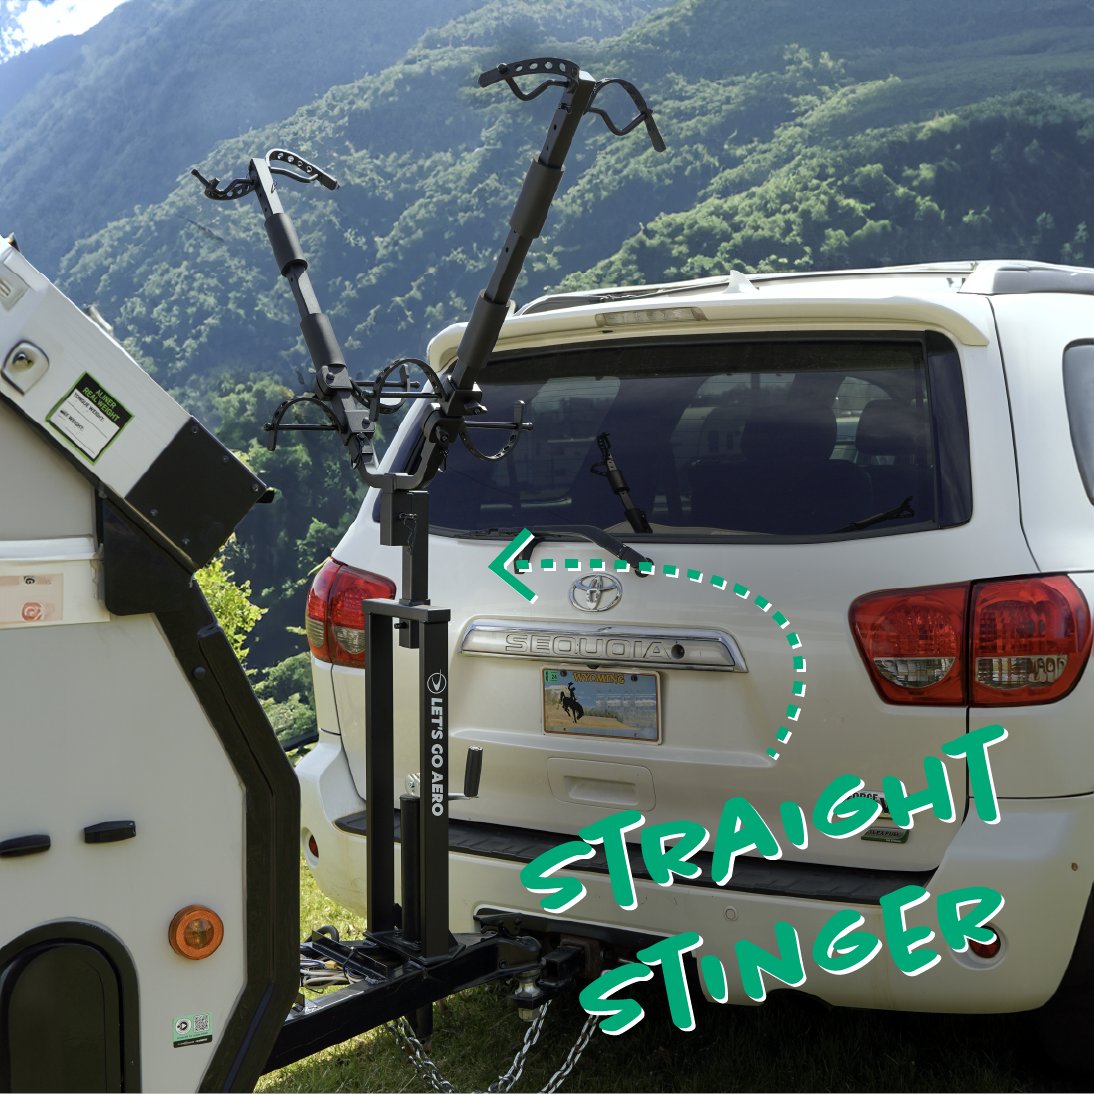 Our new Jack-IT Plus comes with not one but TWO different stinger options! 

🚲 Now made to fit even more travel trailers the Jack-IT PLUS comes with both a straight and angled stinger for even more bike mounting flexibility. 

SHOP NOW: l8r.it/bDte

#jackit #rvlife